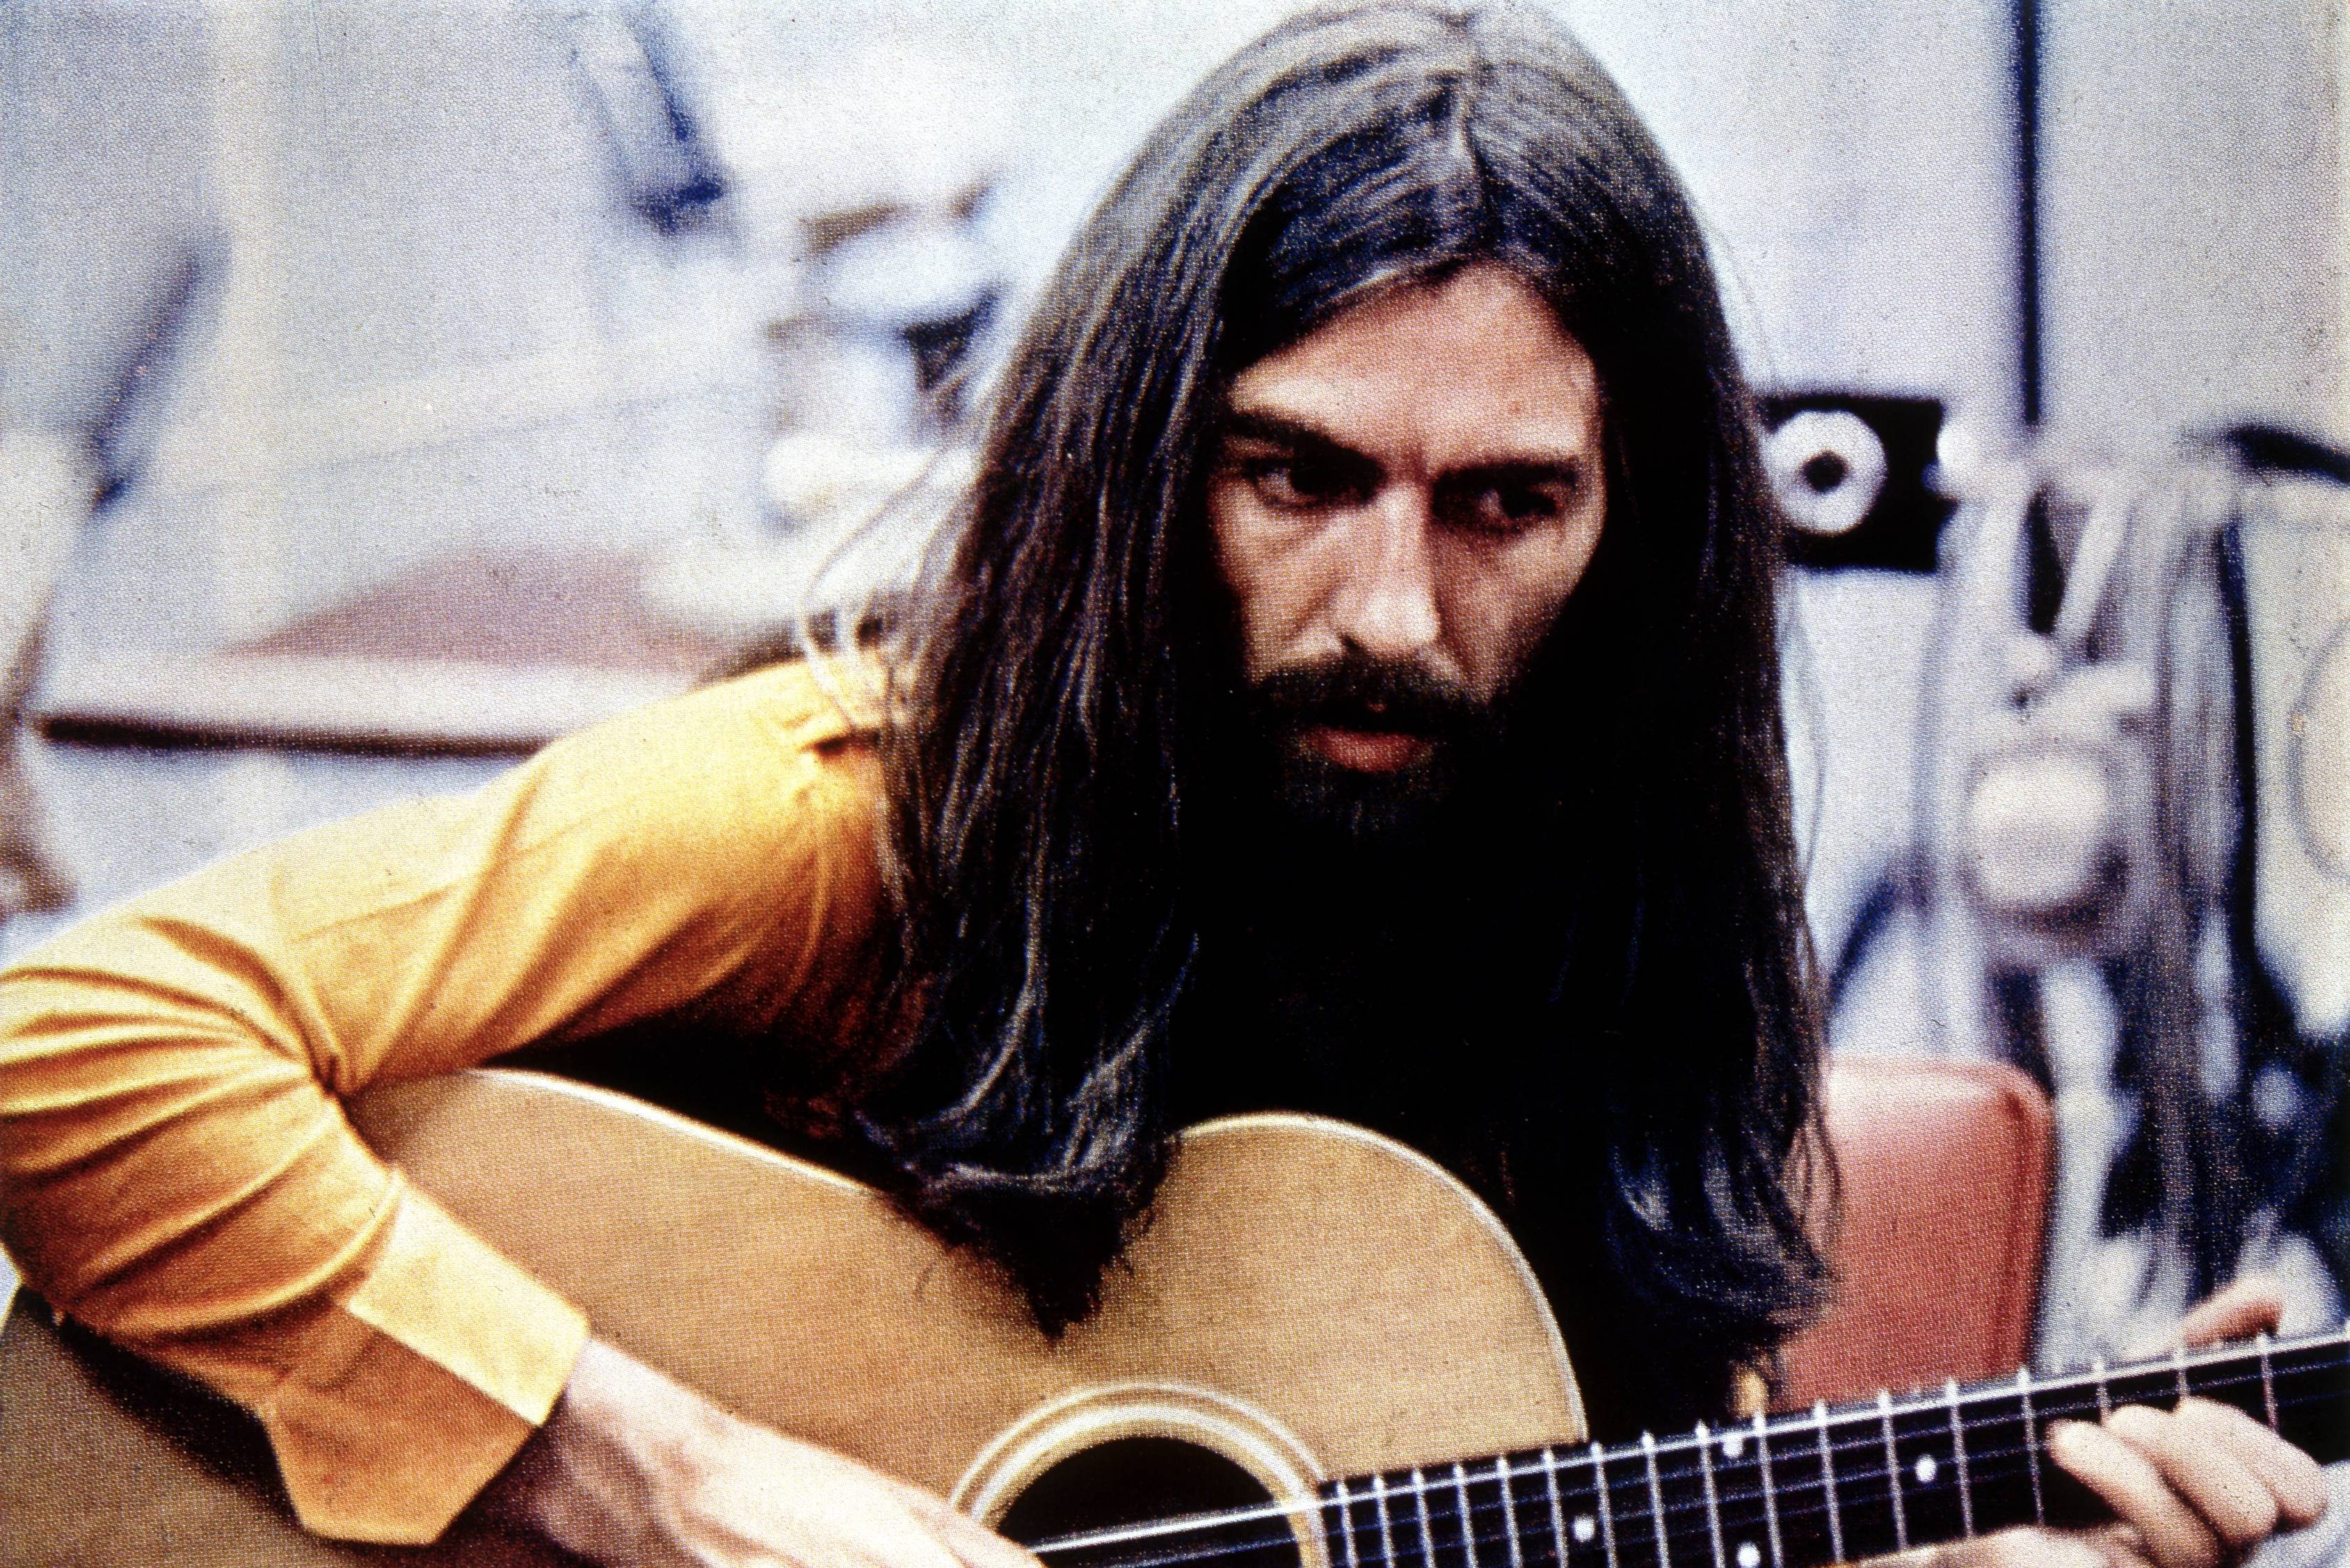 George Harrison playing acoustic guitar circa 1970.